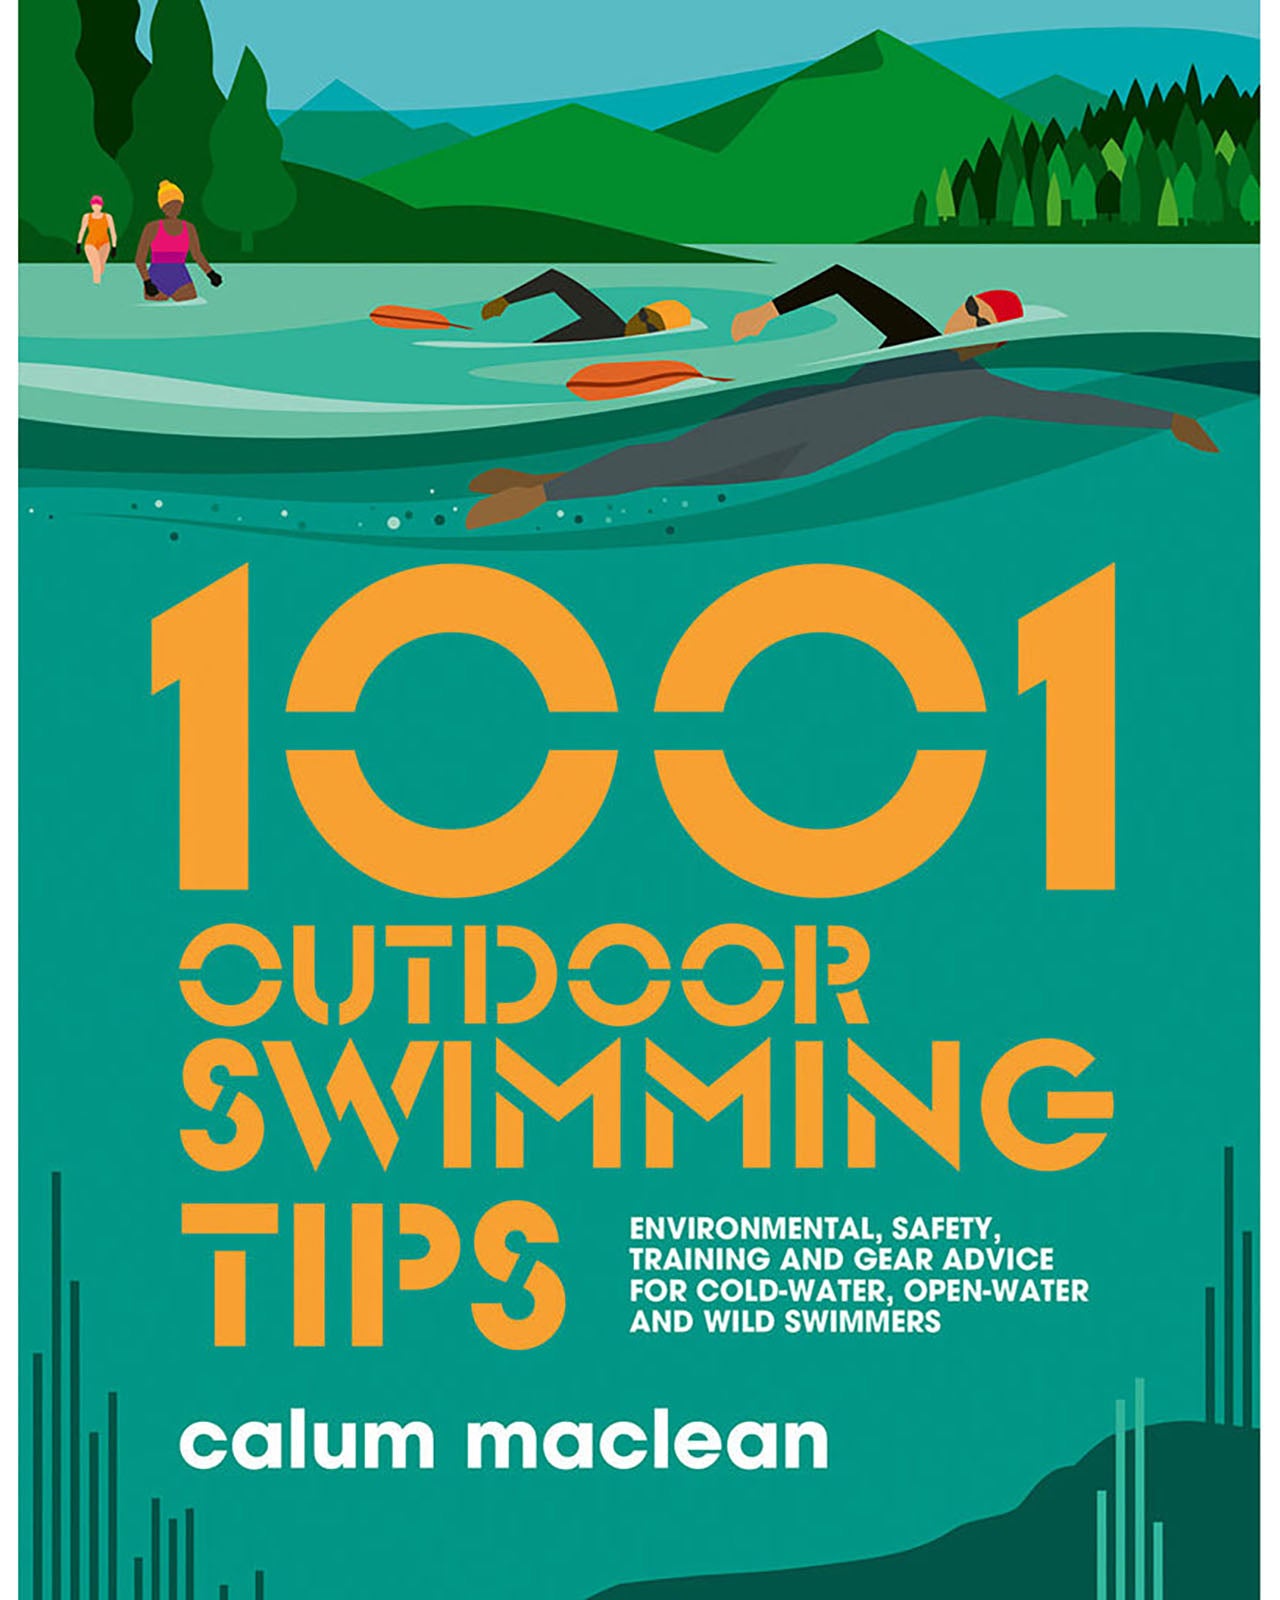 1001 Outdoor Swimming Tips by Calum Maclean